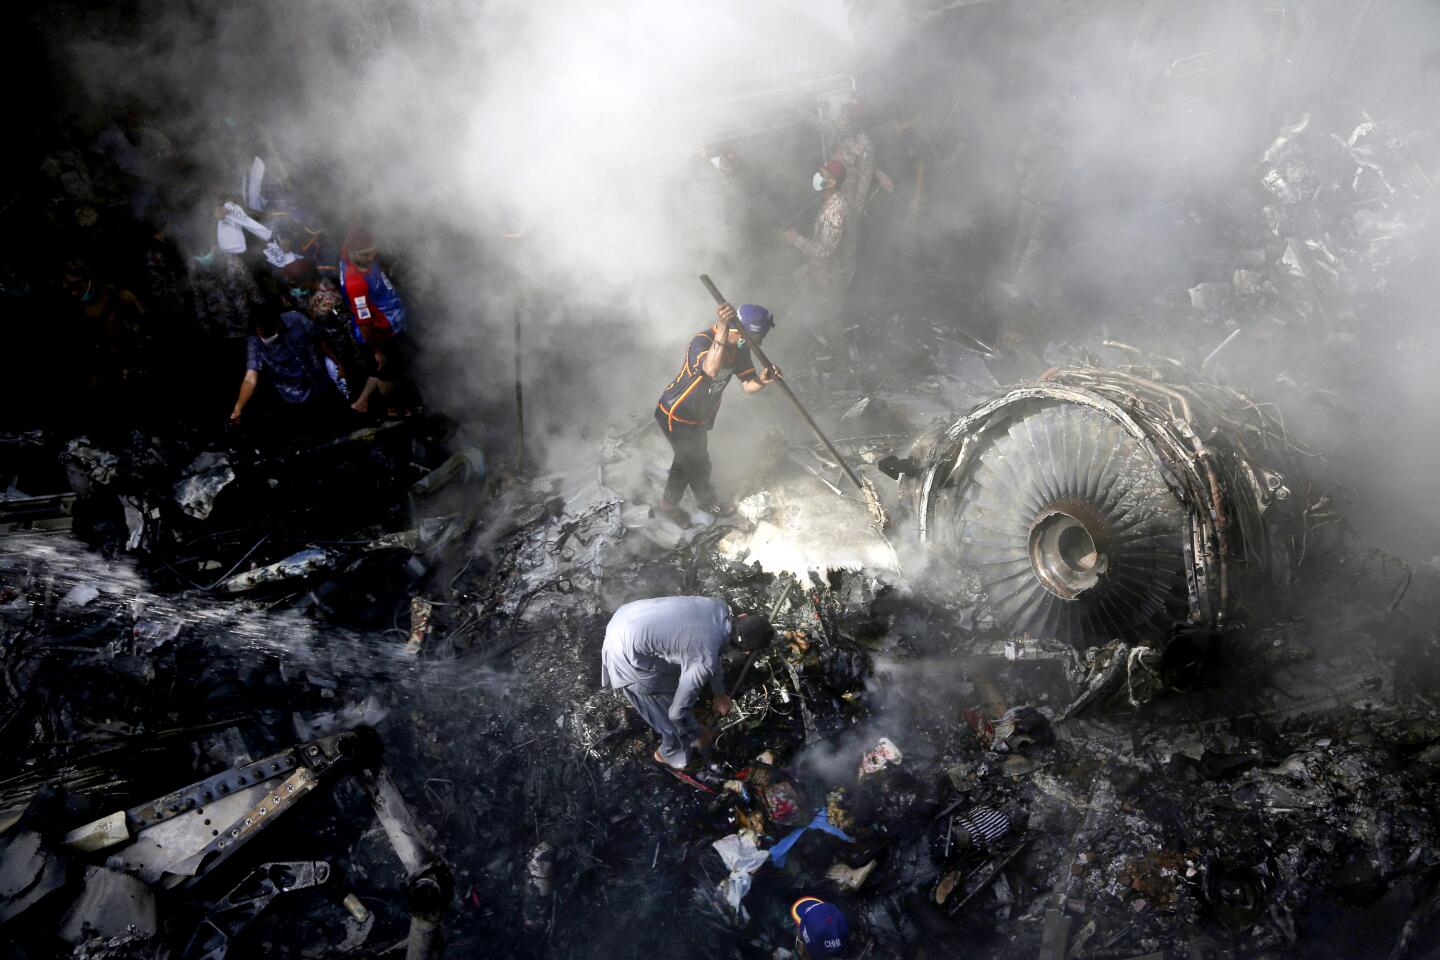 Volunteers search for survivors amid the wreckage of a Pakistani airliner that crashed Friday in a neighborhood in Karachi.